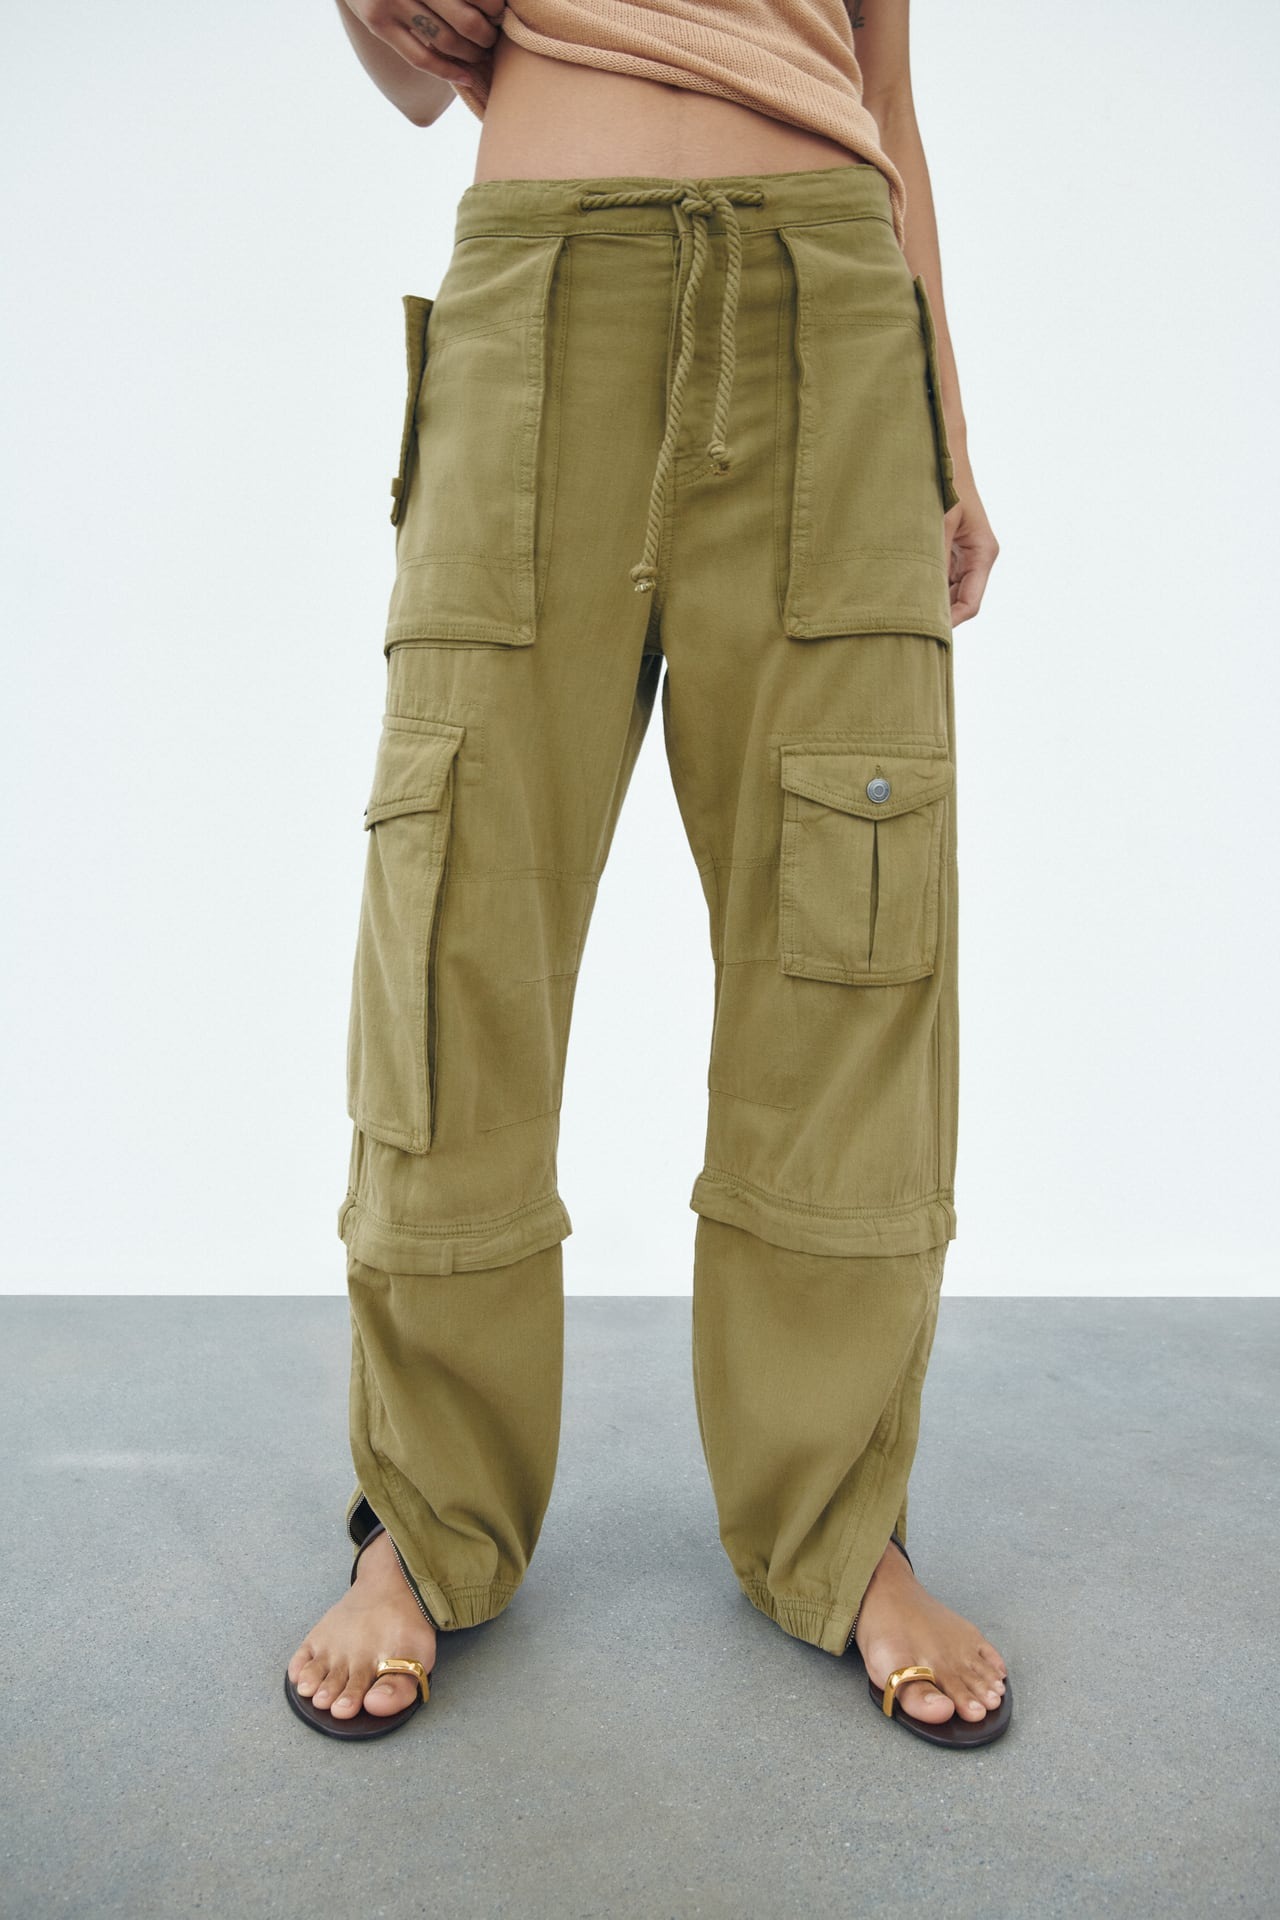 Details more than 138 long cargo pants womens latest